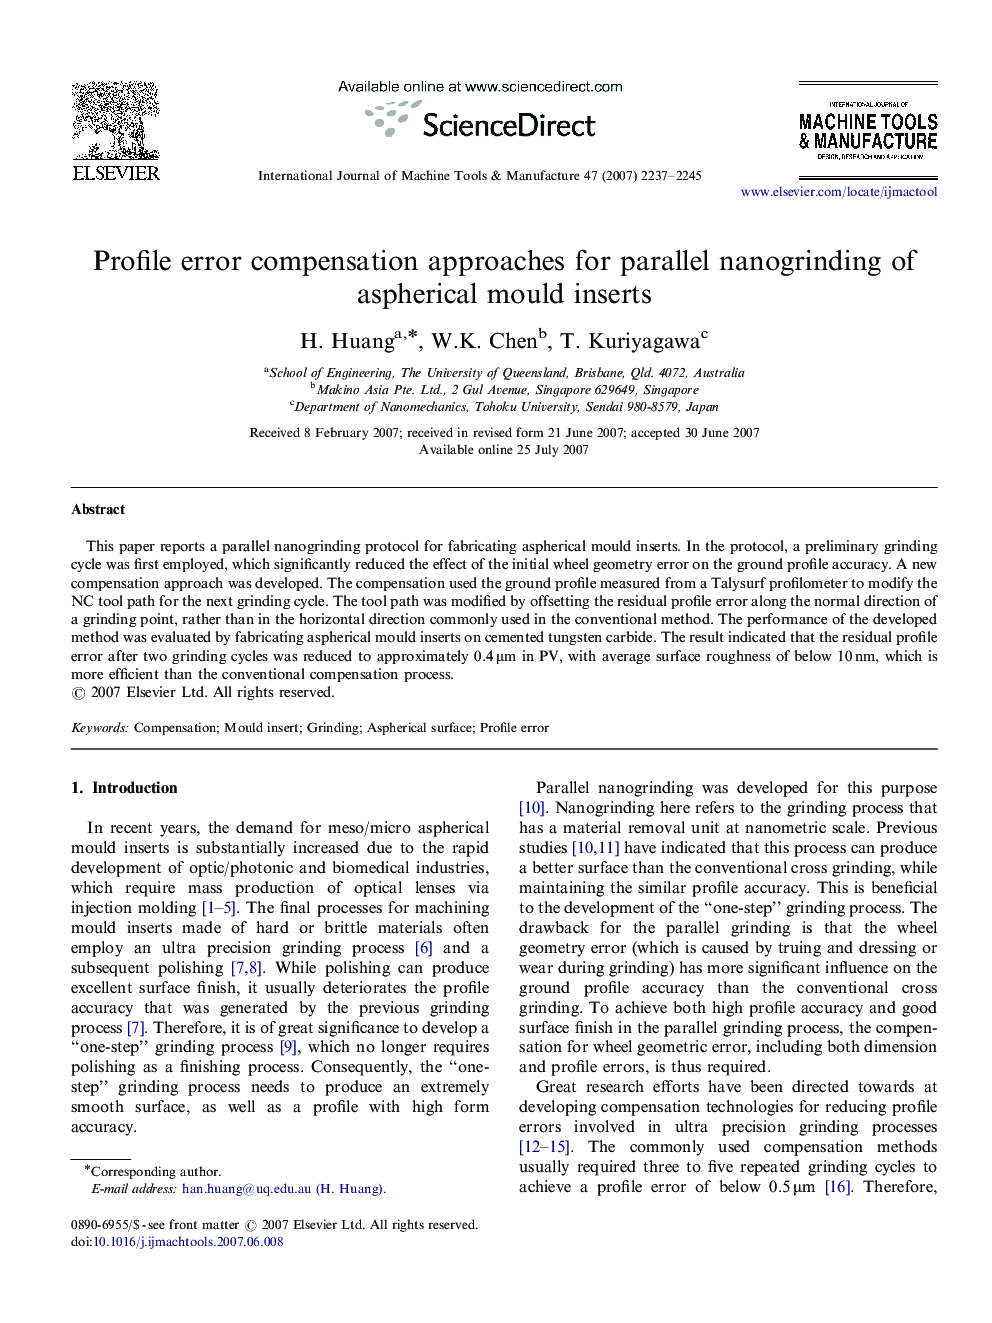 Profile error compensation approaches for parallel nanogrinding of aspherical mould inserts